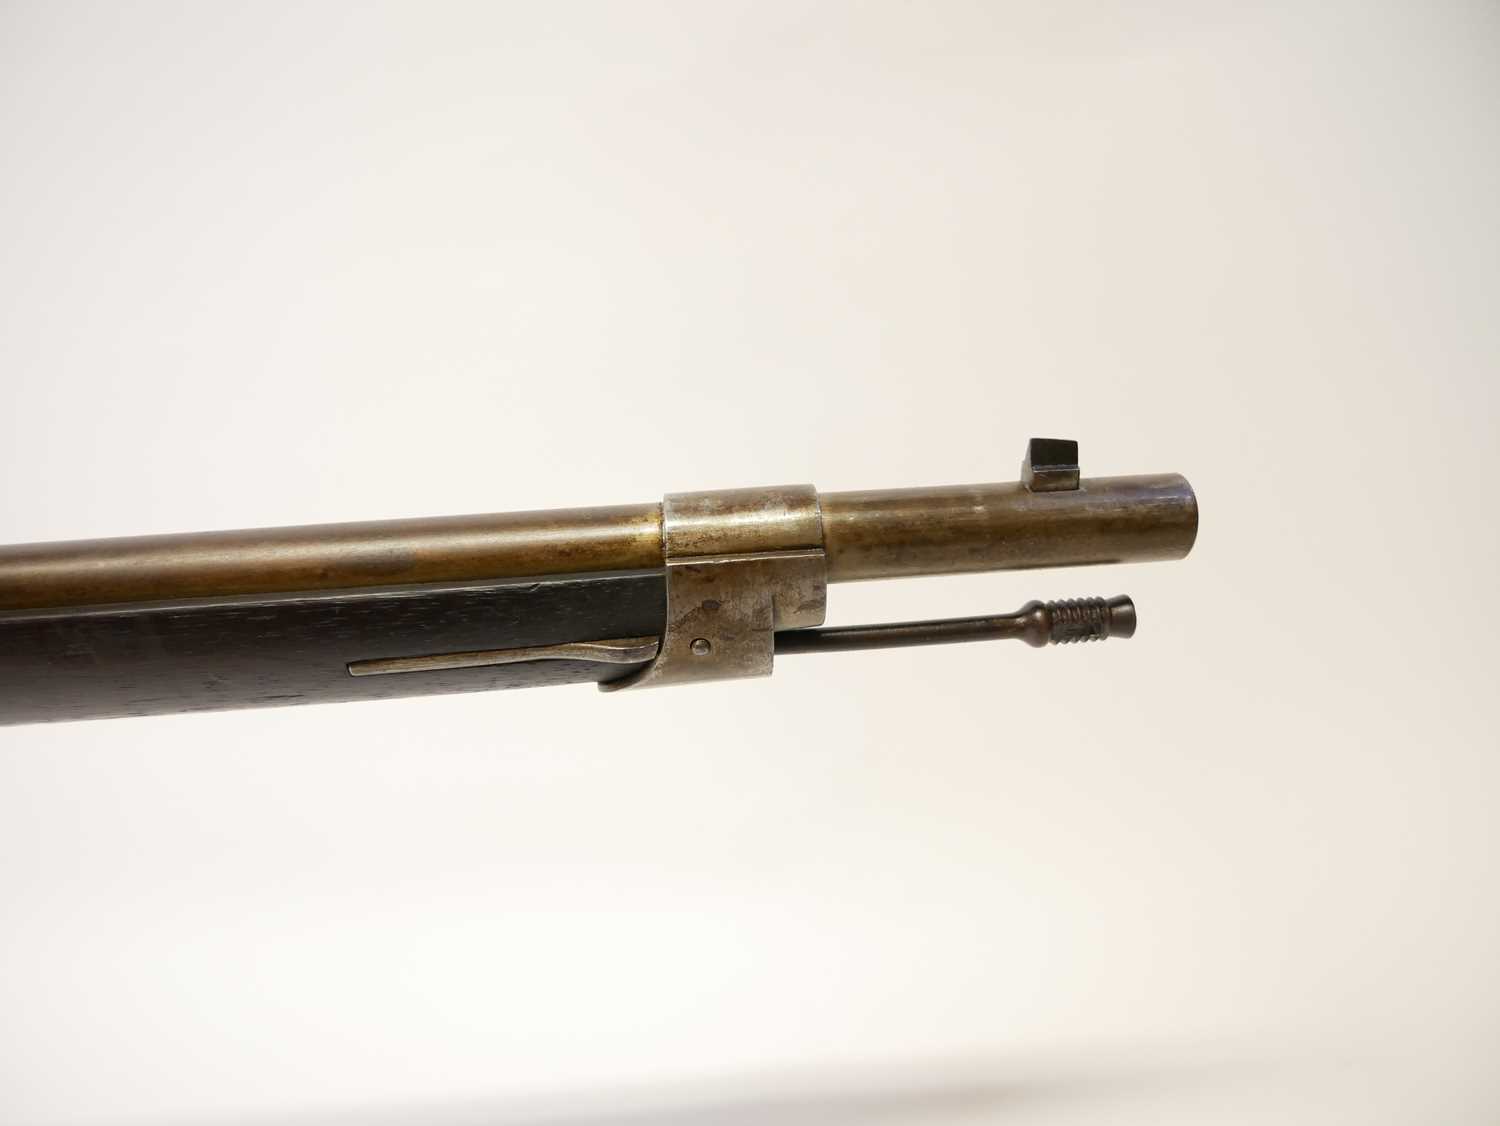 Dutch Beaumont-Vitali 1871/88 11mm bolt action rifle, serial number 46, 32inch barrel with tangent - Image 8 of 14